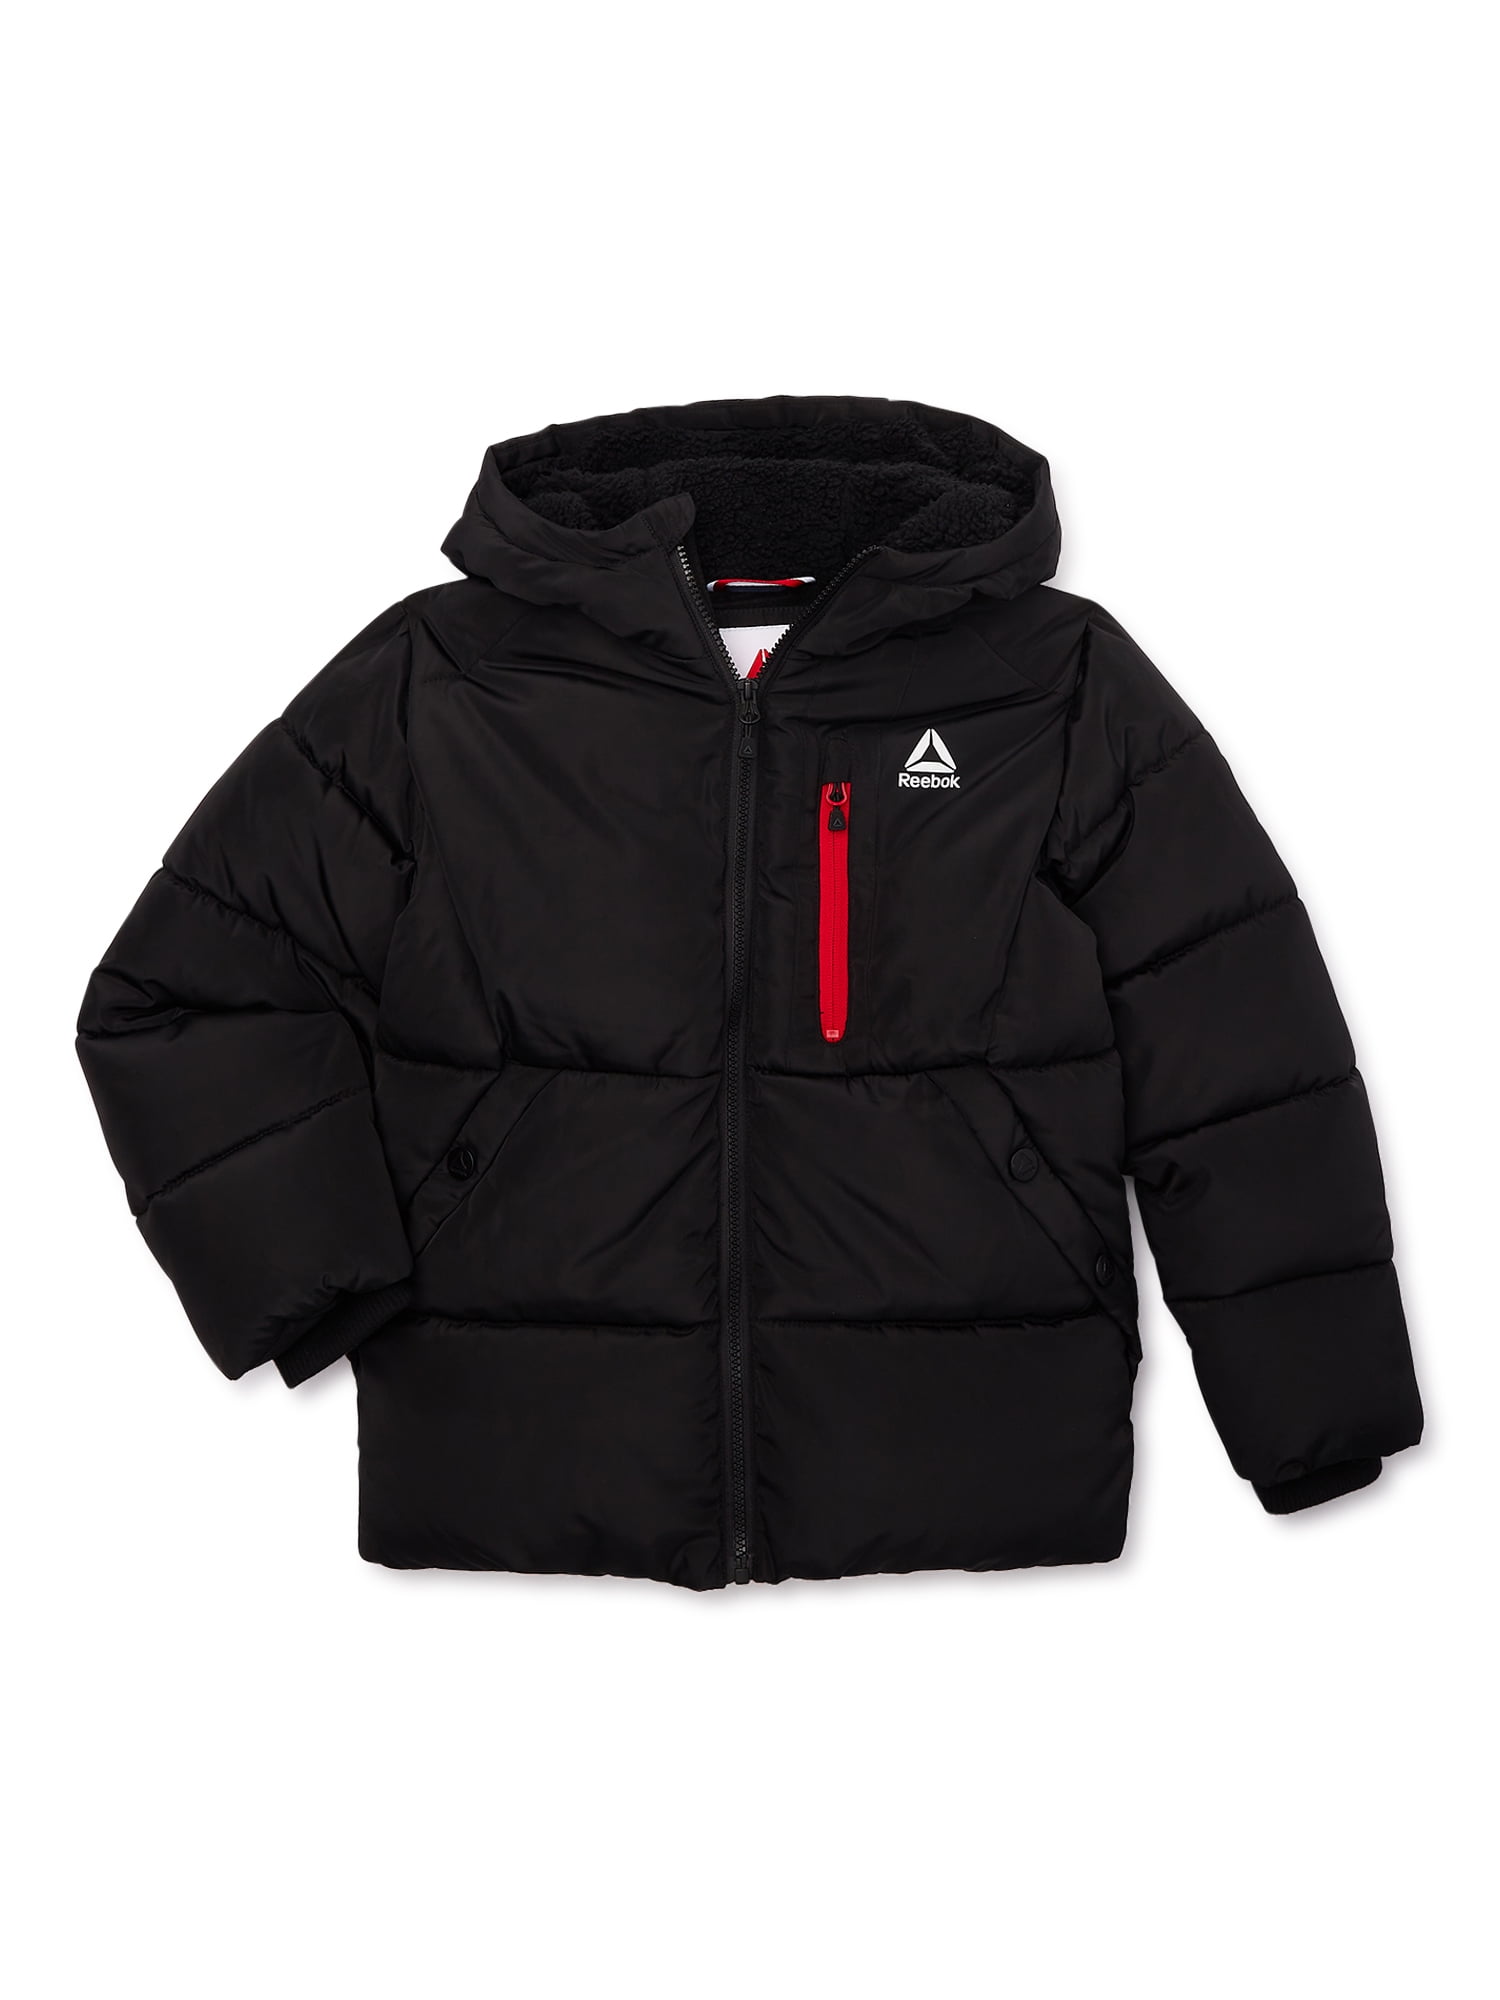 Find Your Perfect Reebok Boys Heavyweight Puffer Jacket with Hood ...